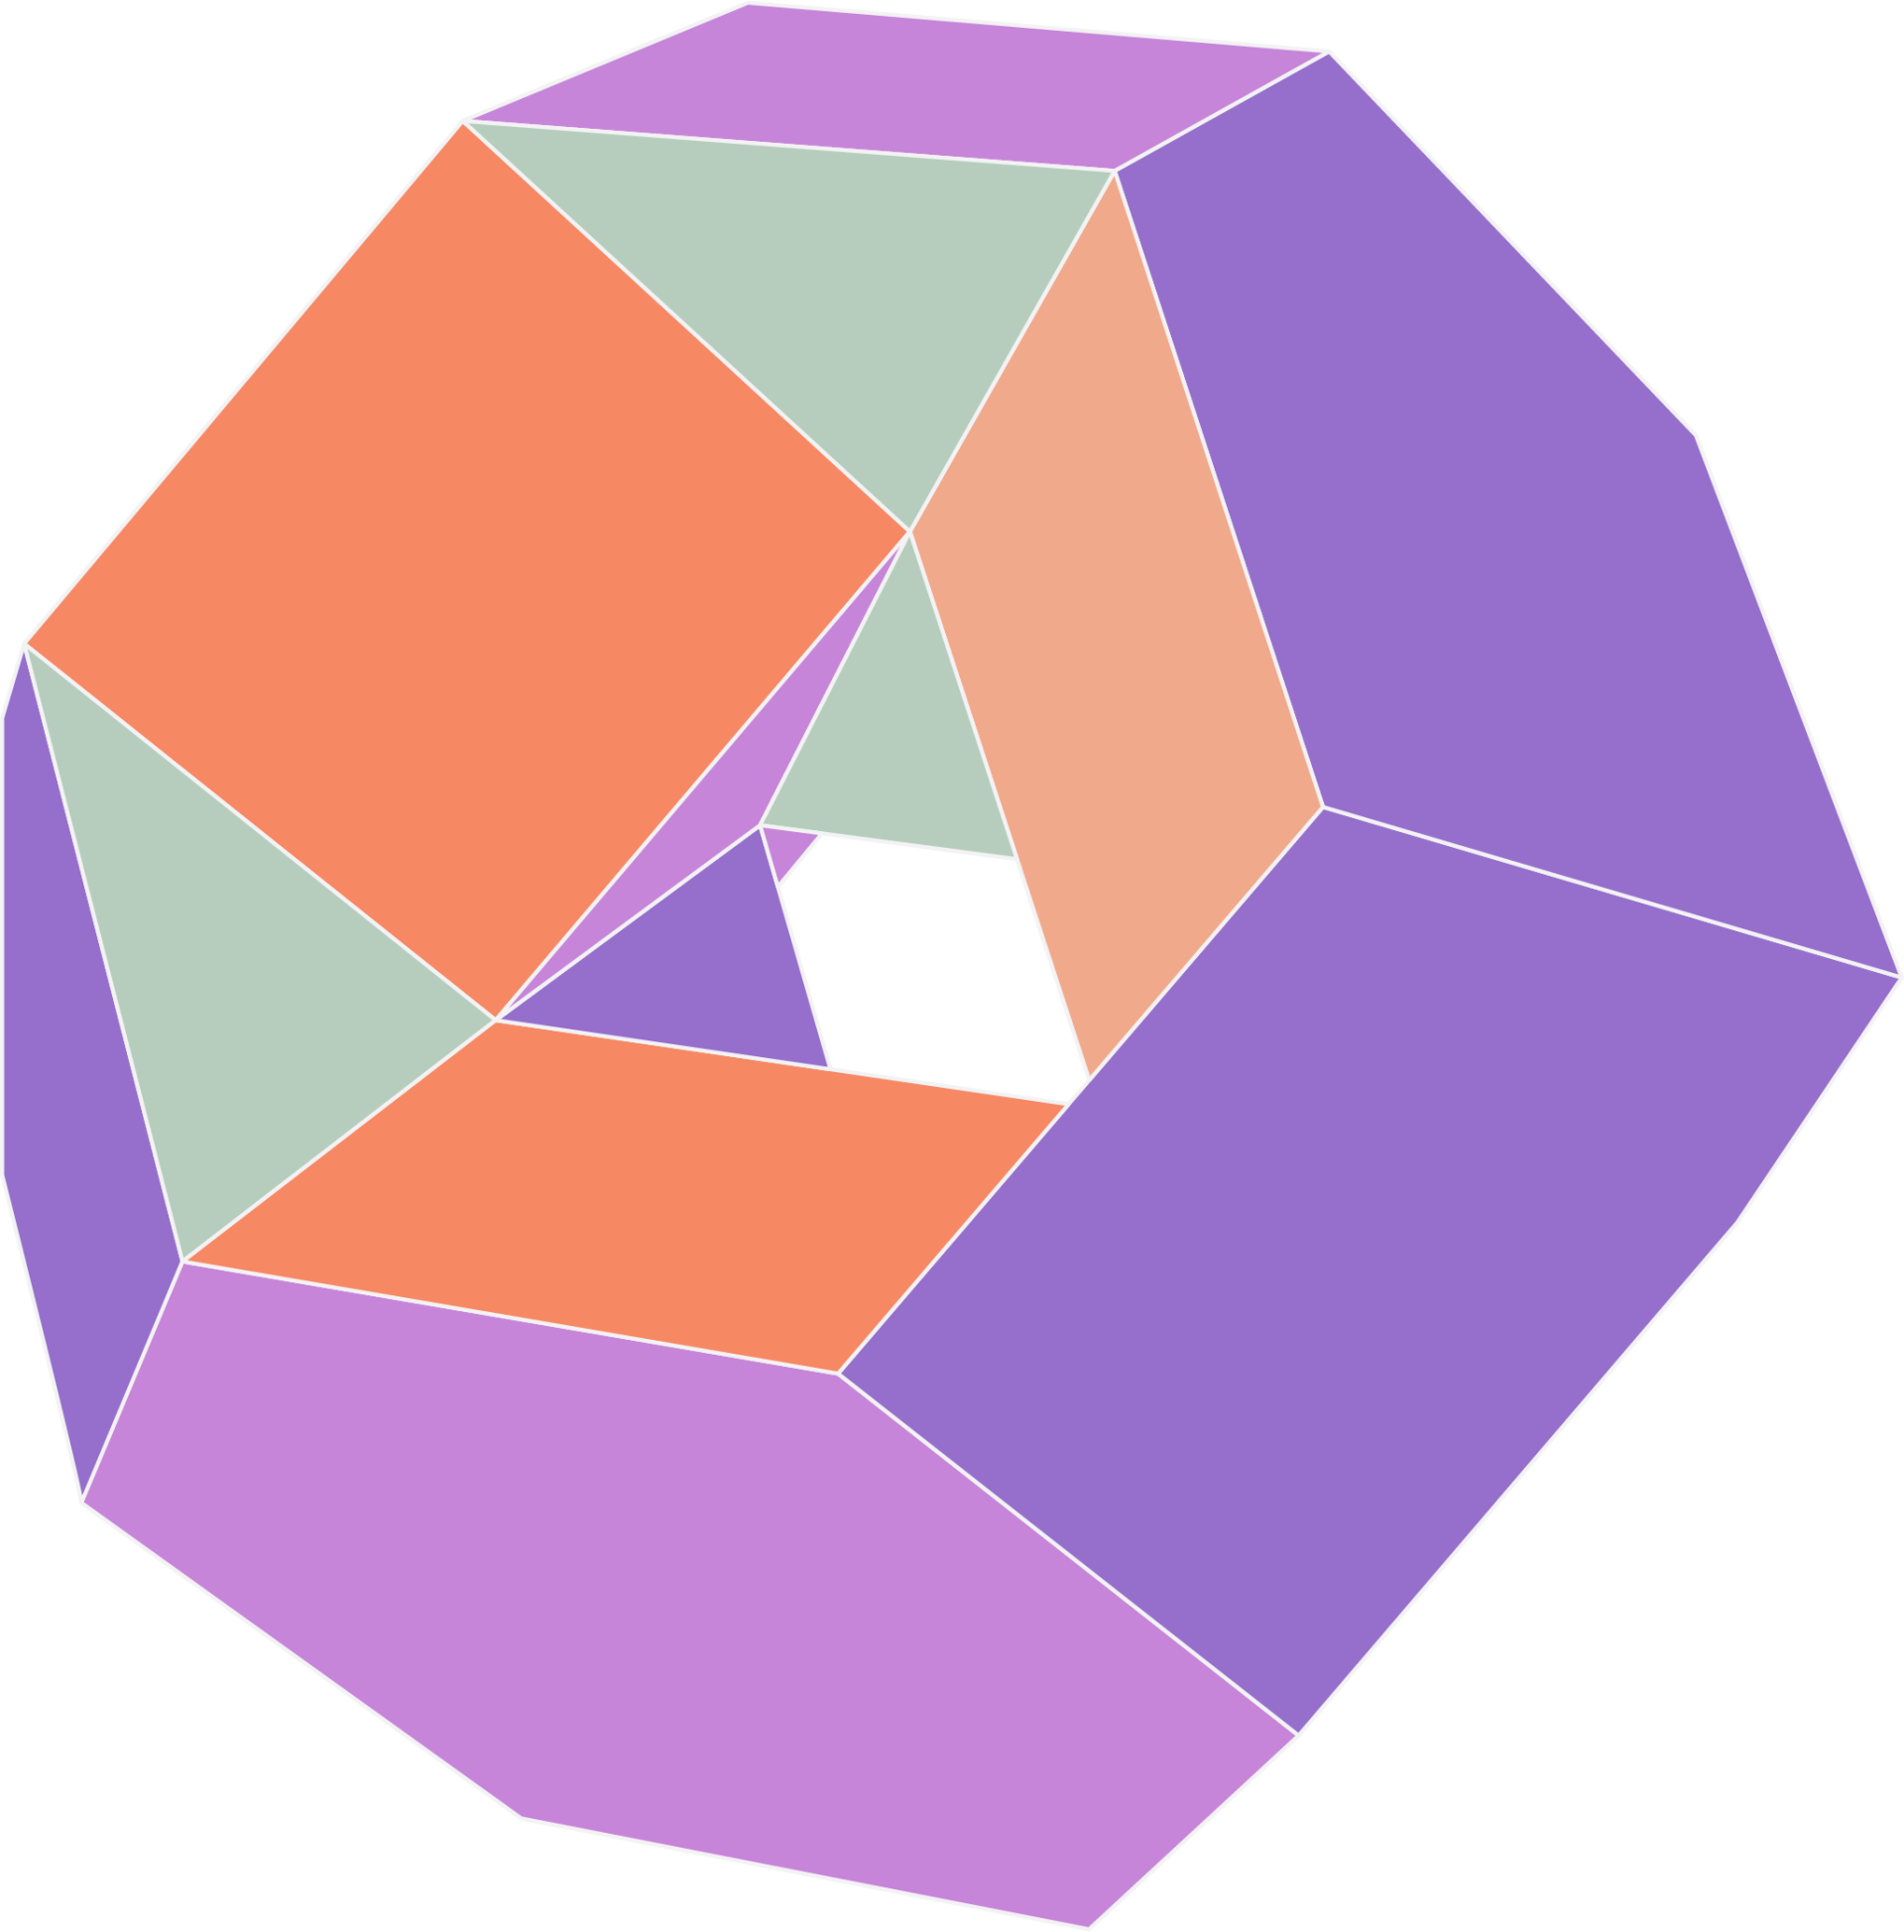 A purple and orange geometric shape with a square in the middle